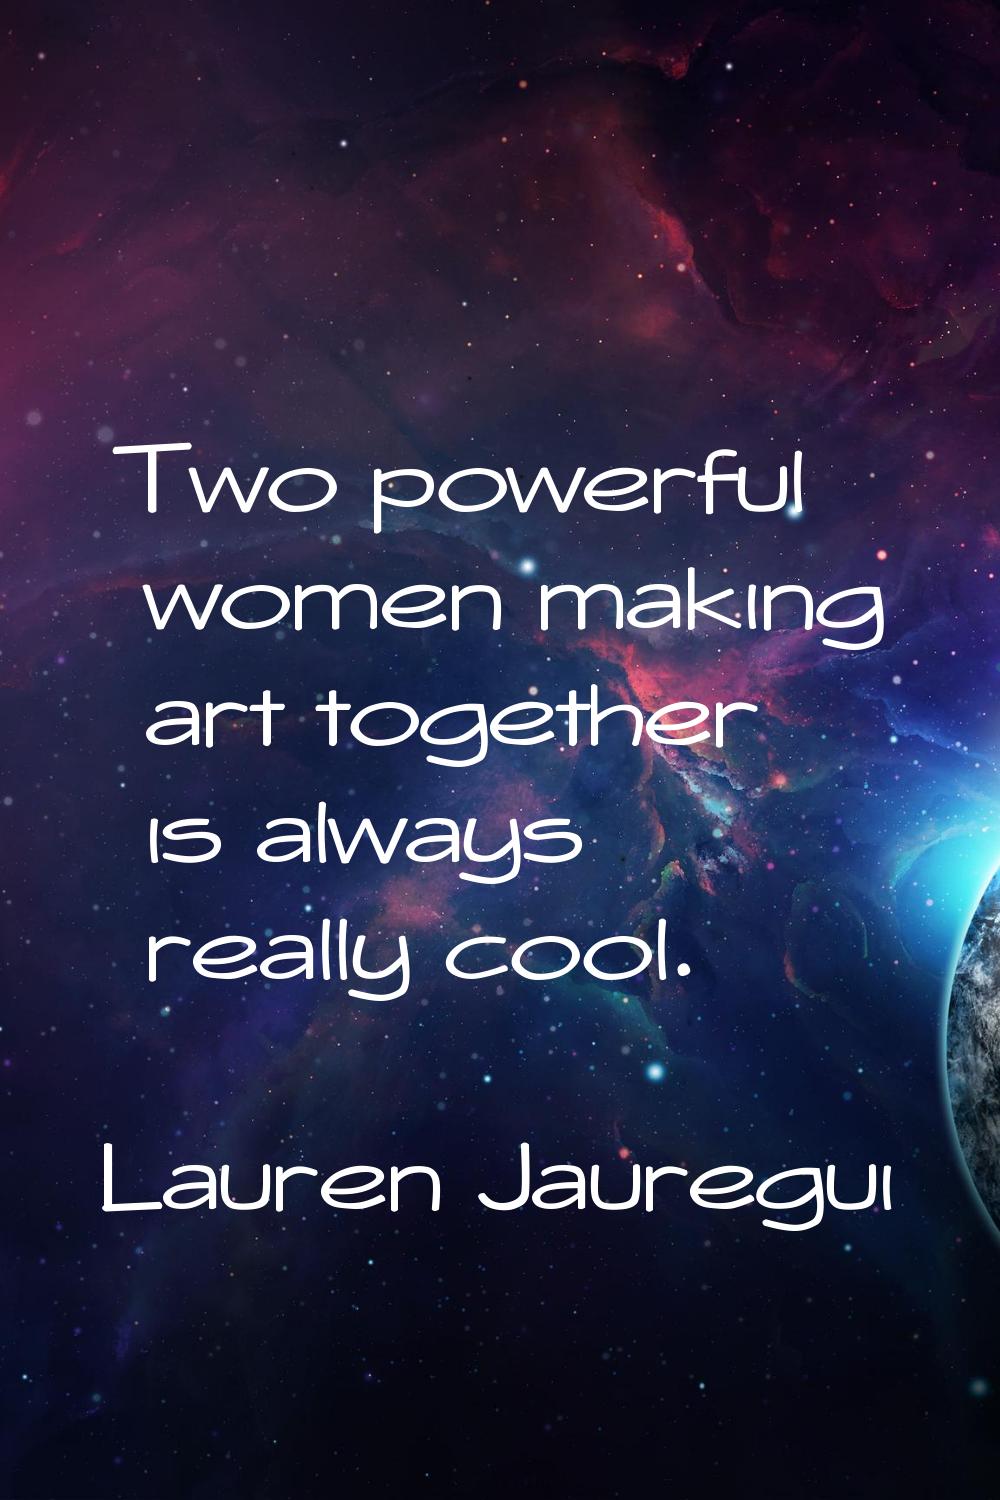 Two powerful women making art together is always really cool.